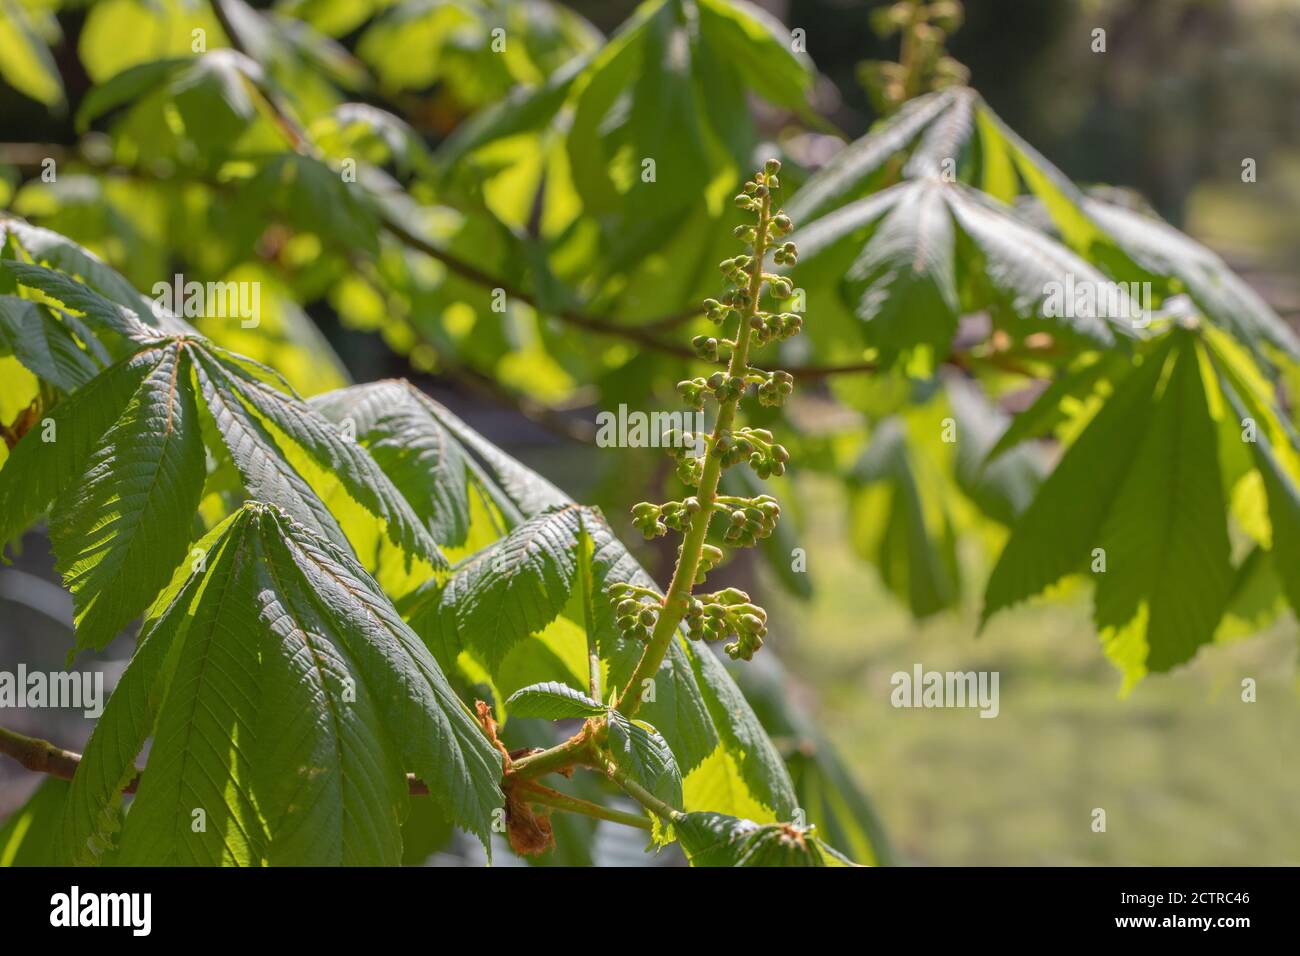 Horse Chestnut Tree (Aesculus hippocastanum). Close up of still to open, upright, flower buds. Spring. Stock Photo